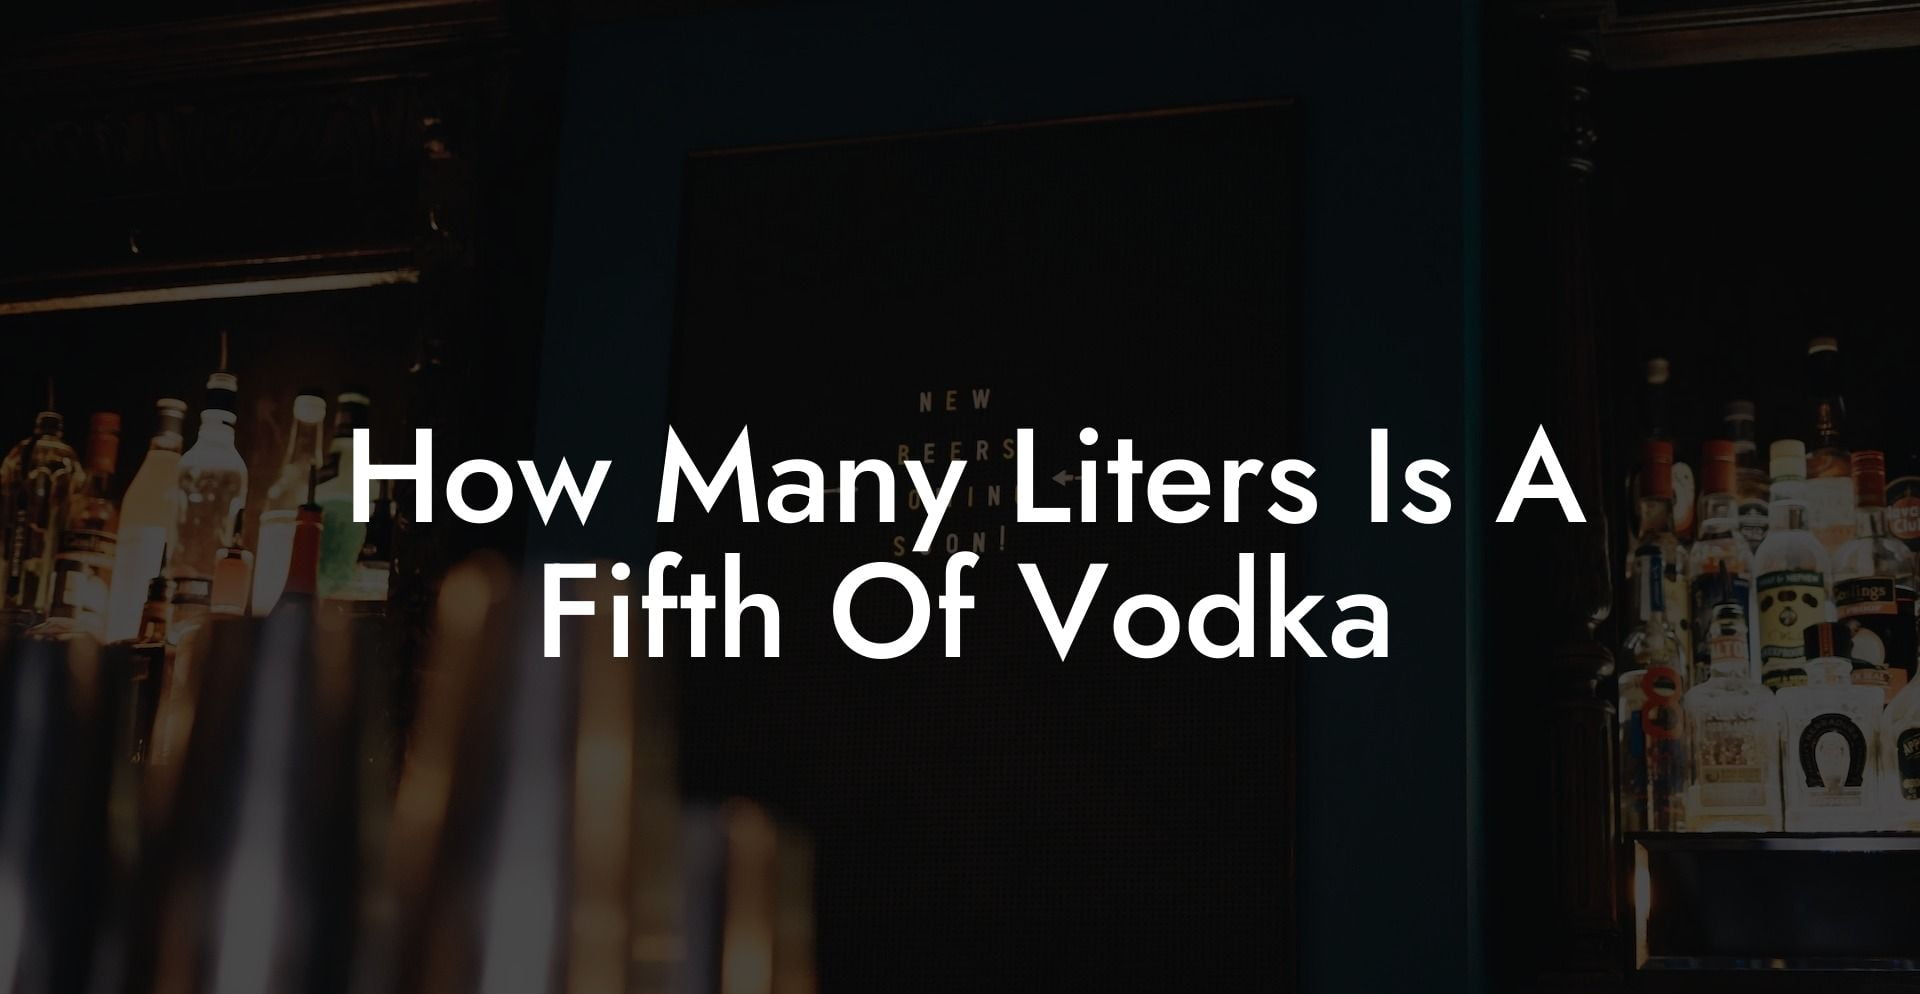 How Many Liters Is A Fifth Of Vodka